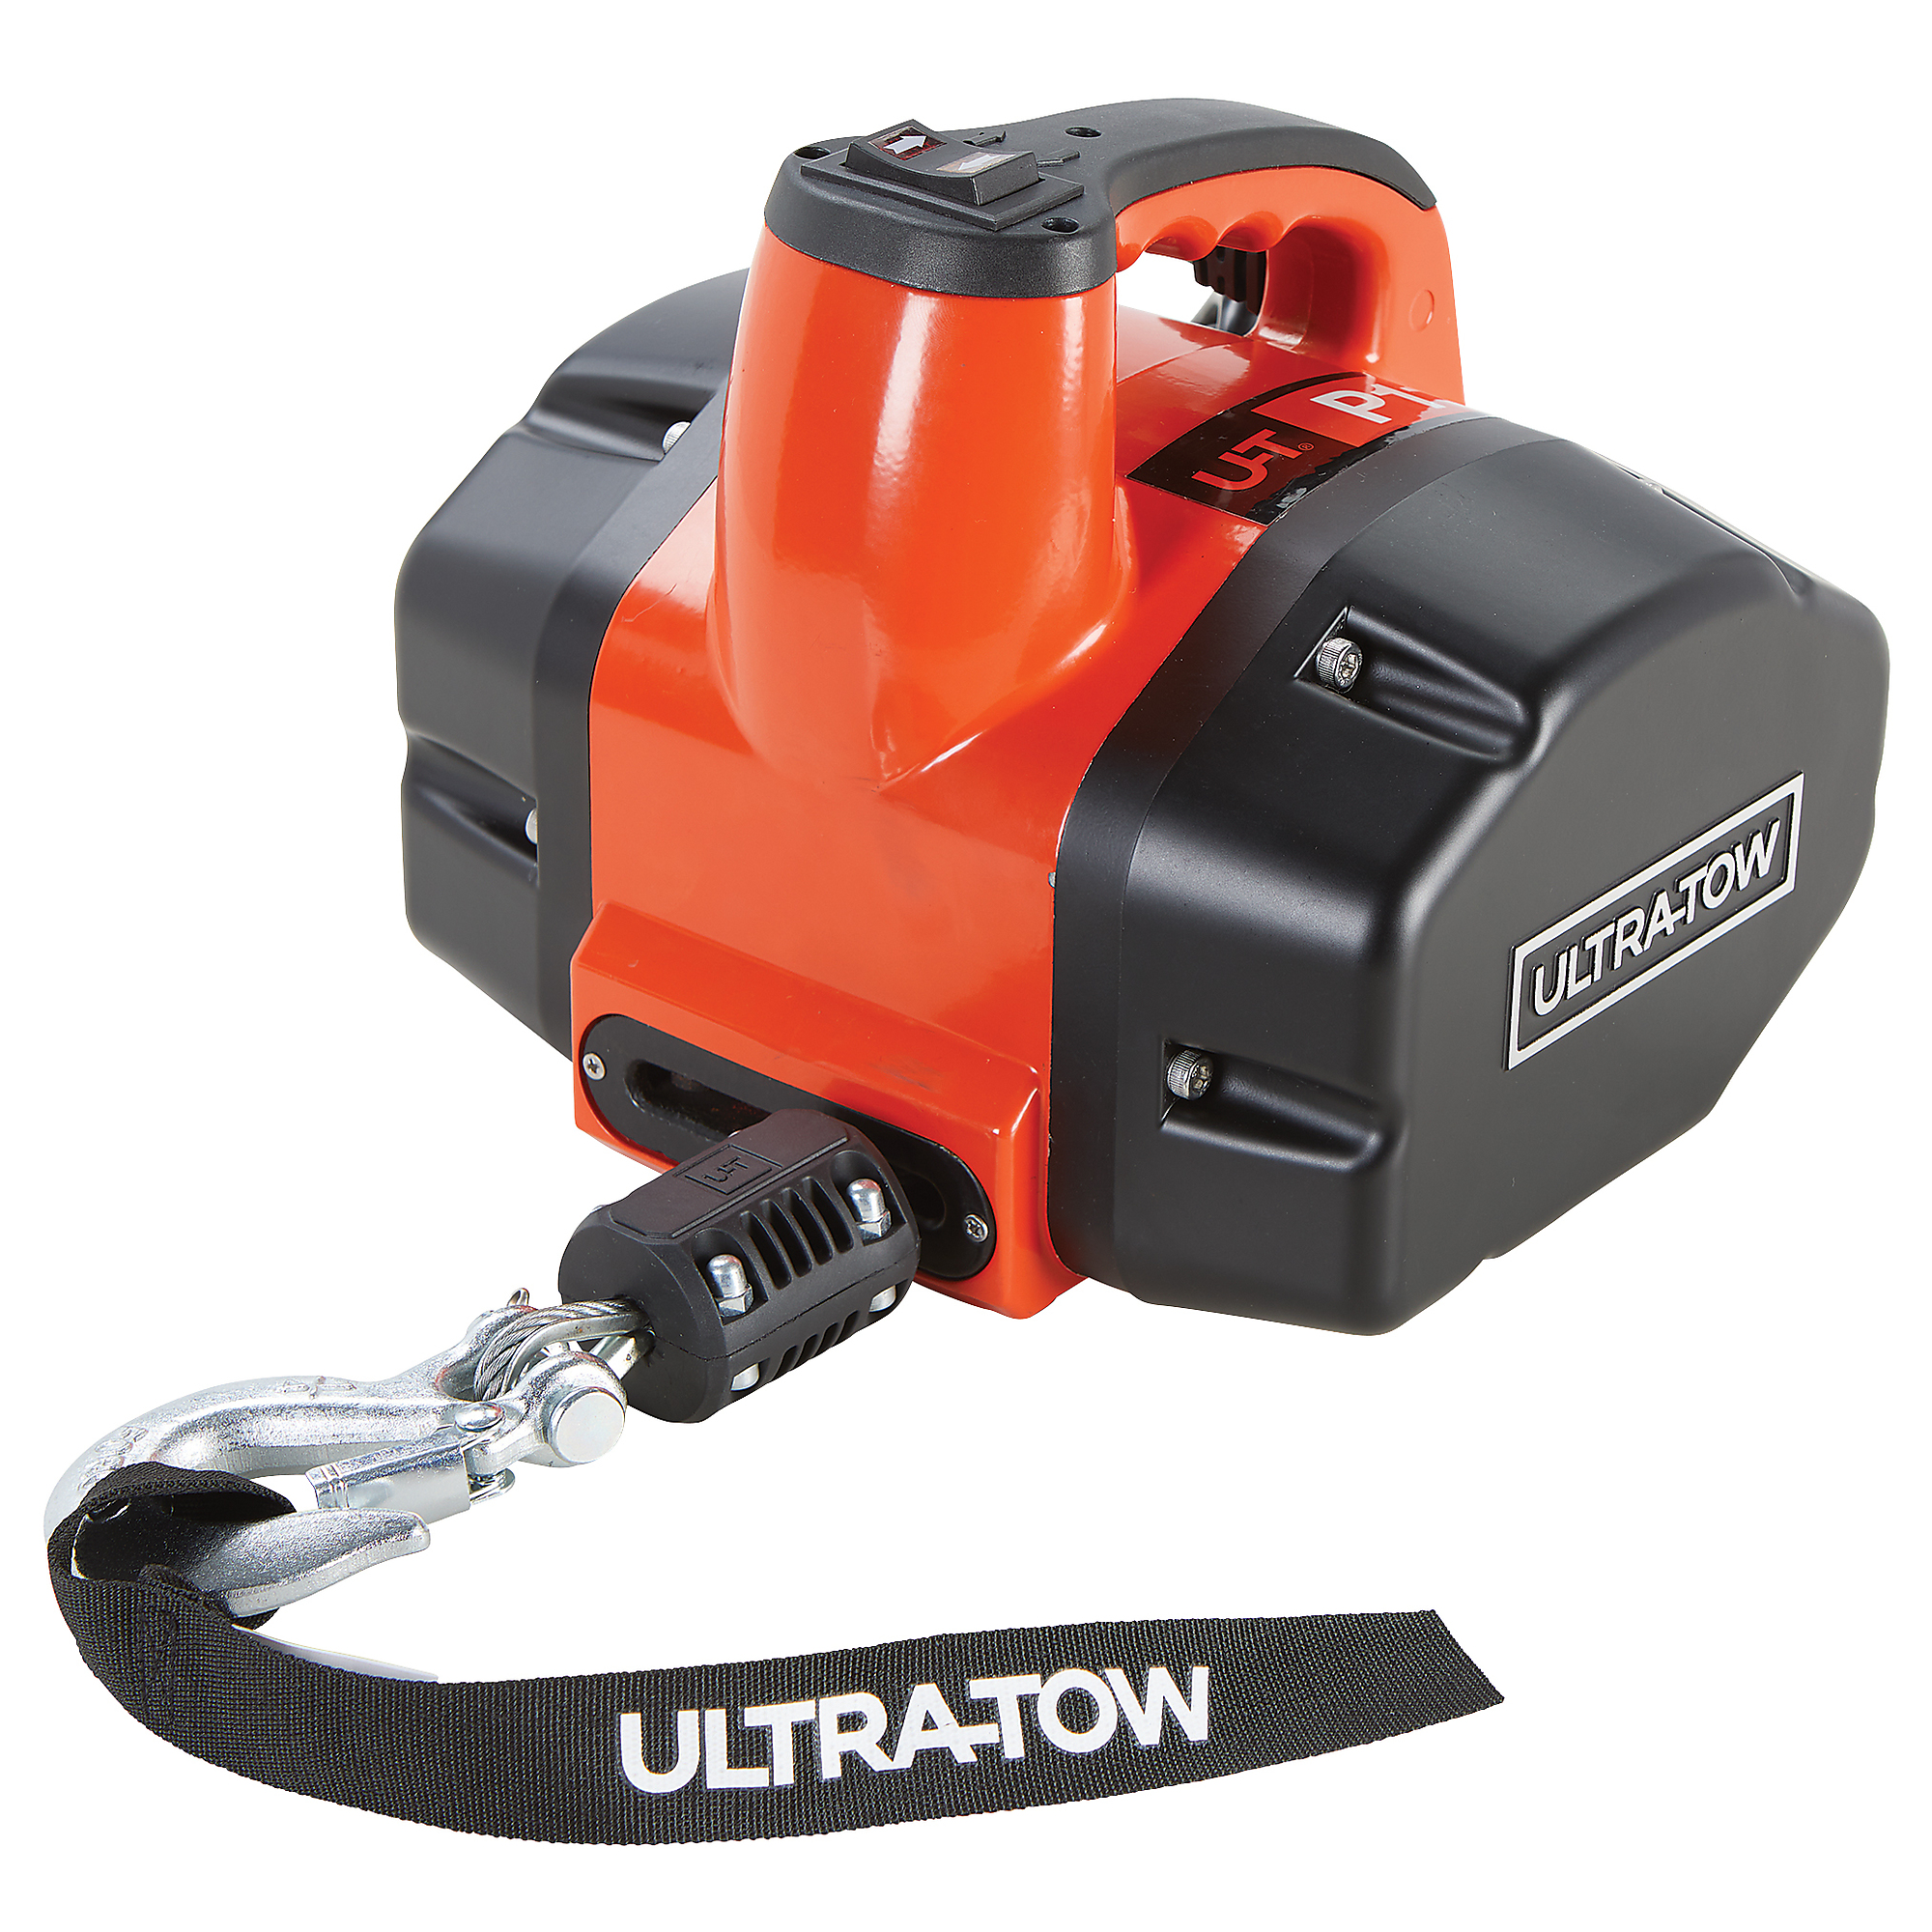 Ultra-Tow Portable Electric Winch, 120V, 1100lb. Horizontal + Vertical Capacity, Steel Cable, Brushless Motor